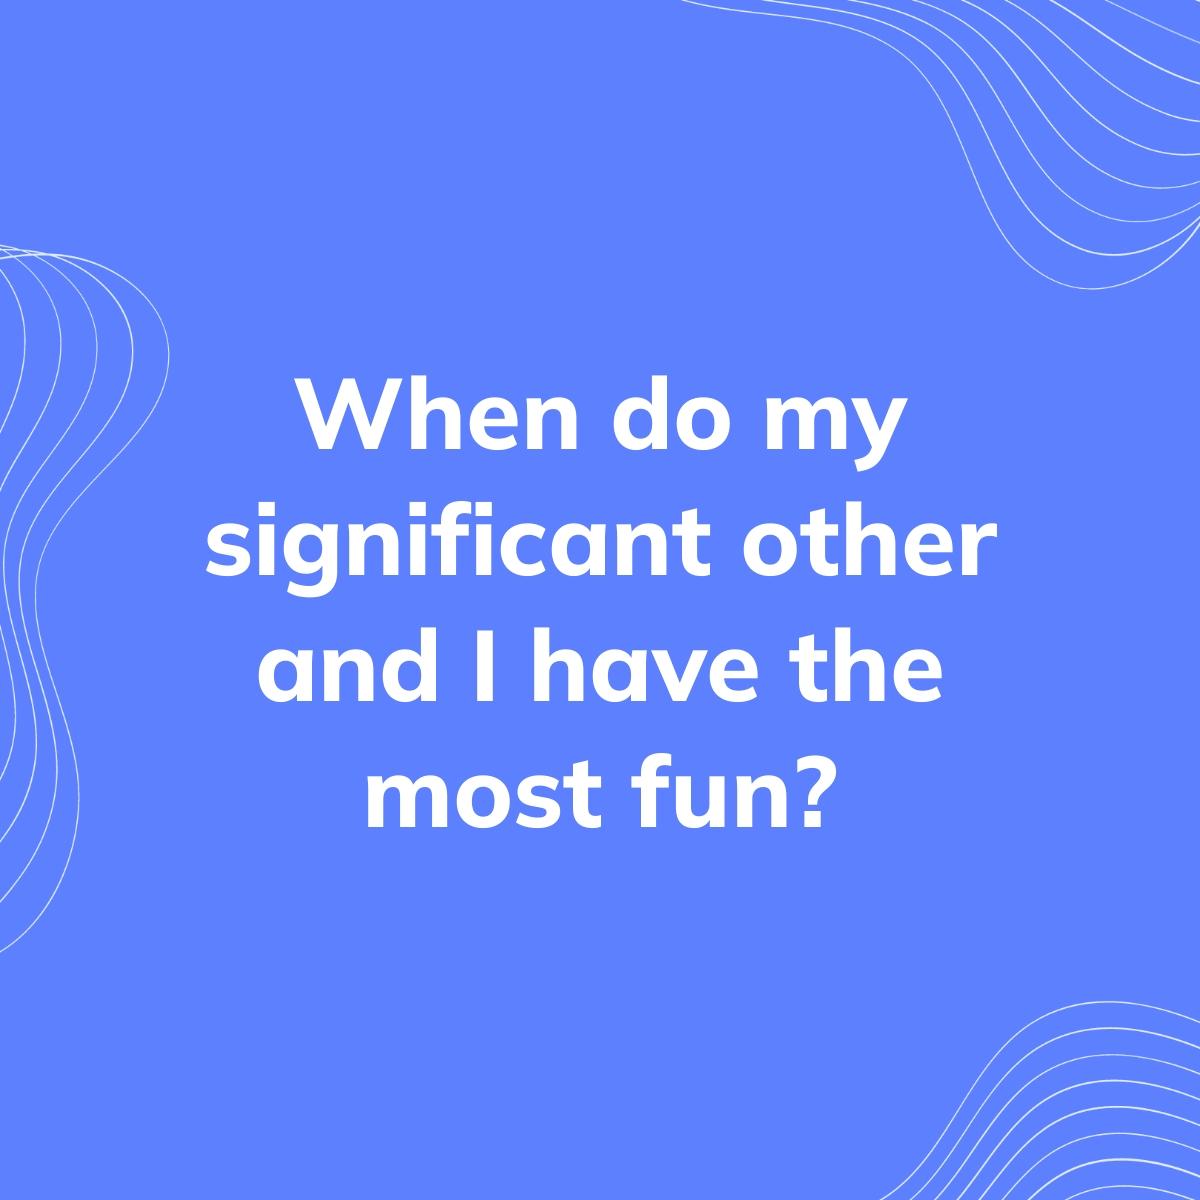 Journal Prompt: When do my significant other and I have the most fun?